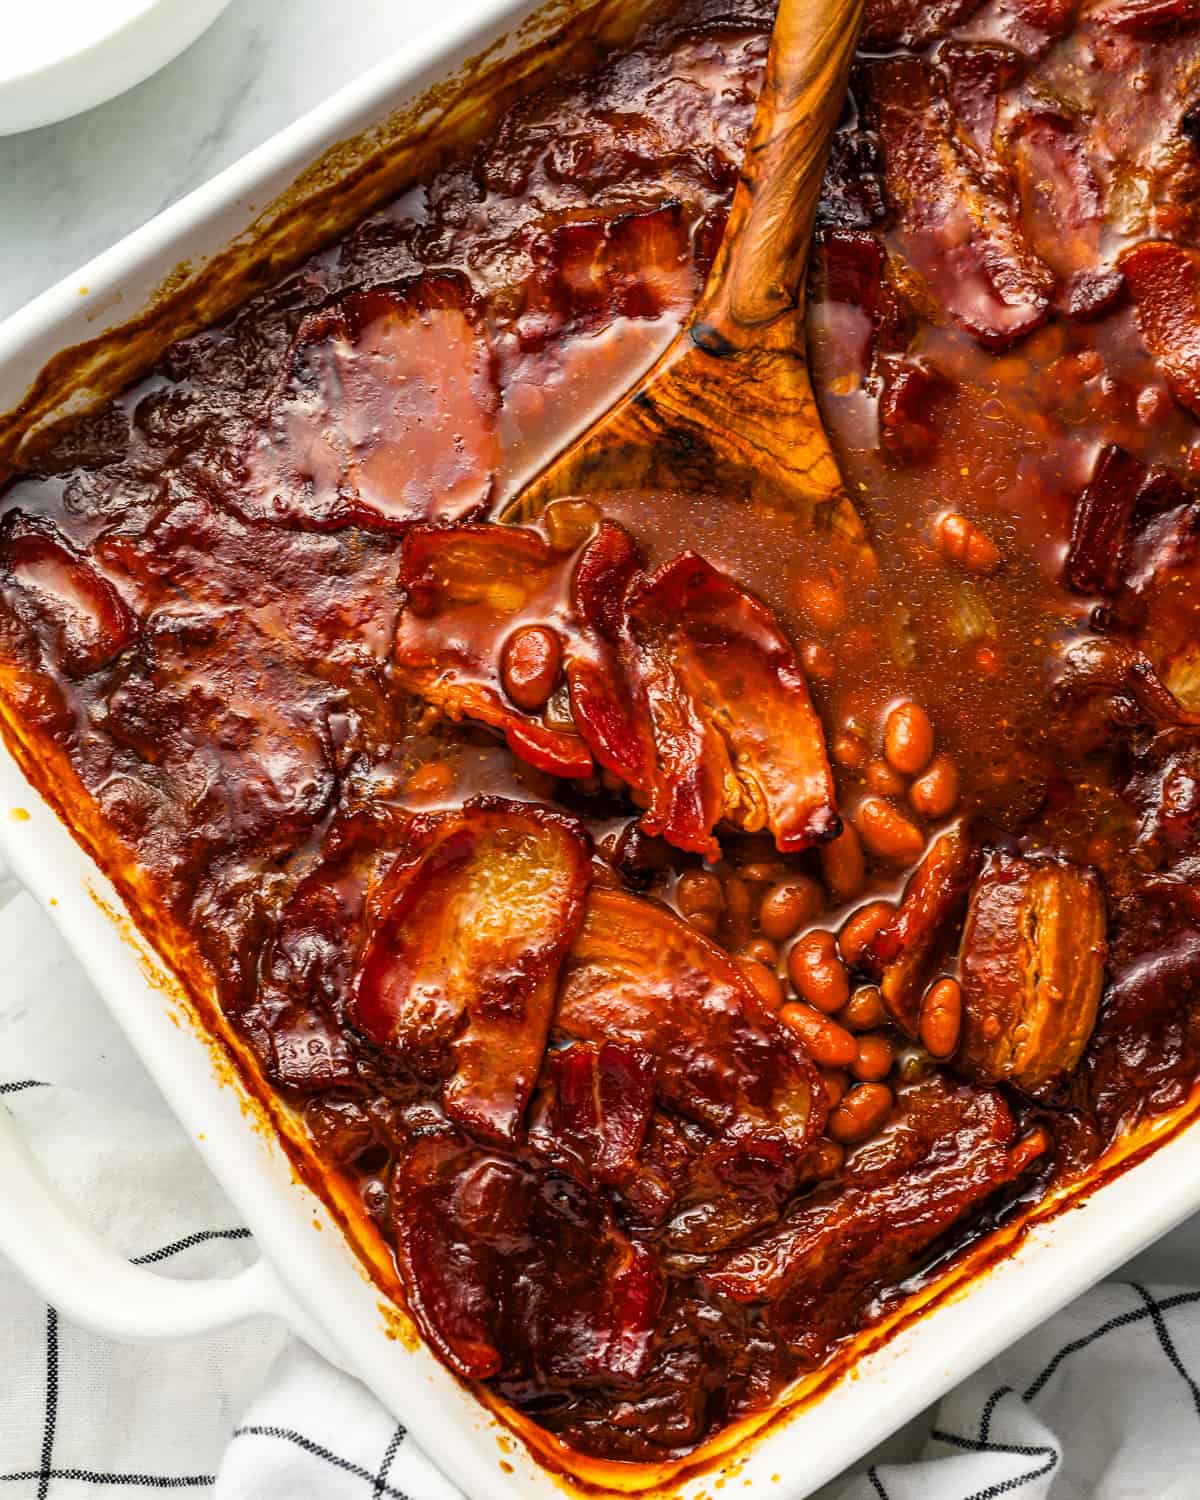 a large casserole dish filled with baked beans and slices of bacon.